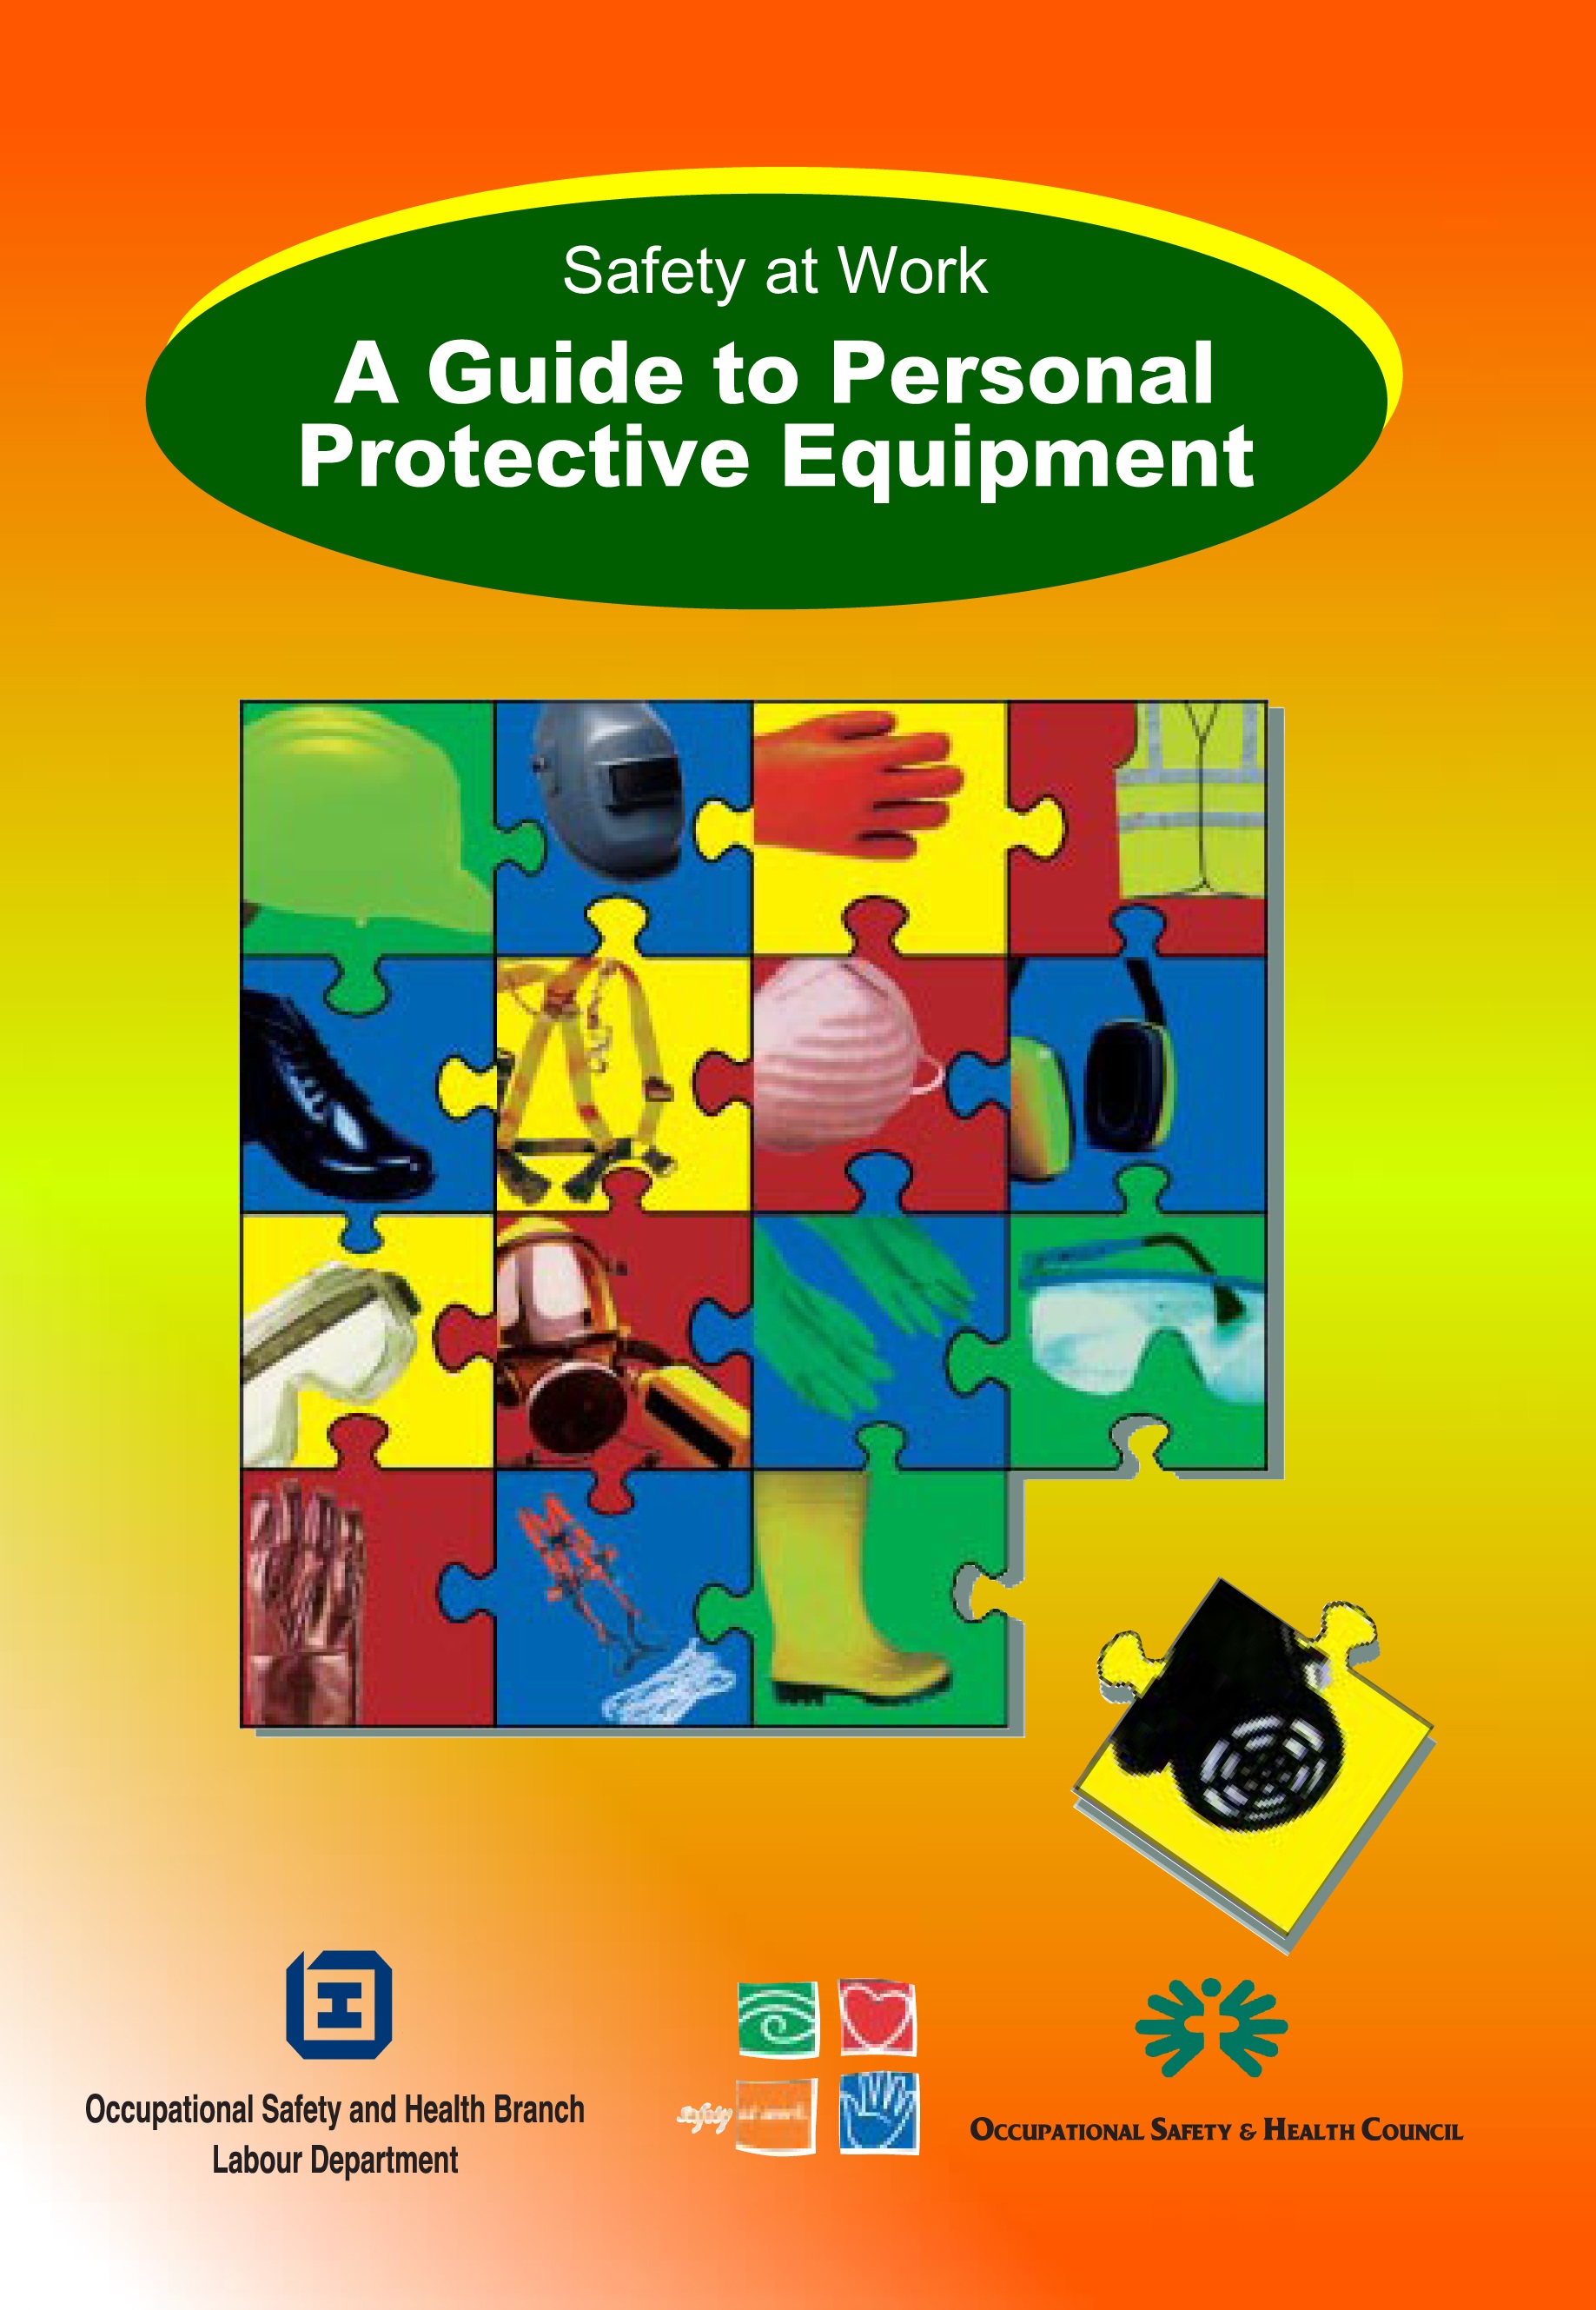 Safety at Work - A Guide to Personal Protective Equipment